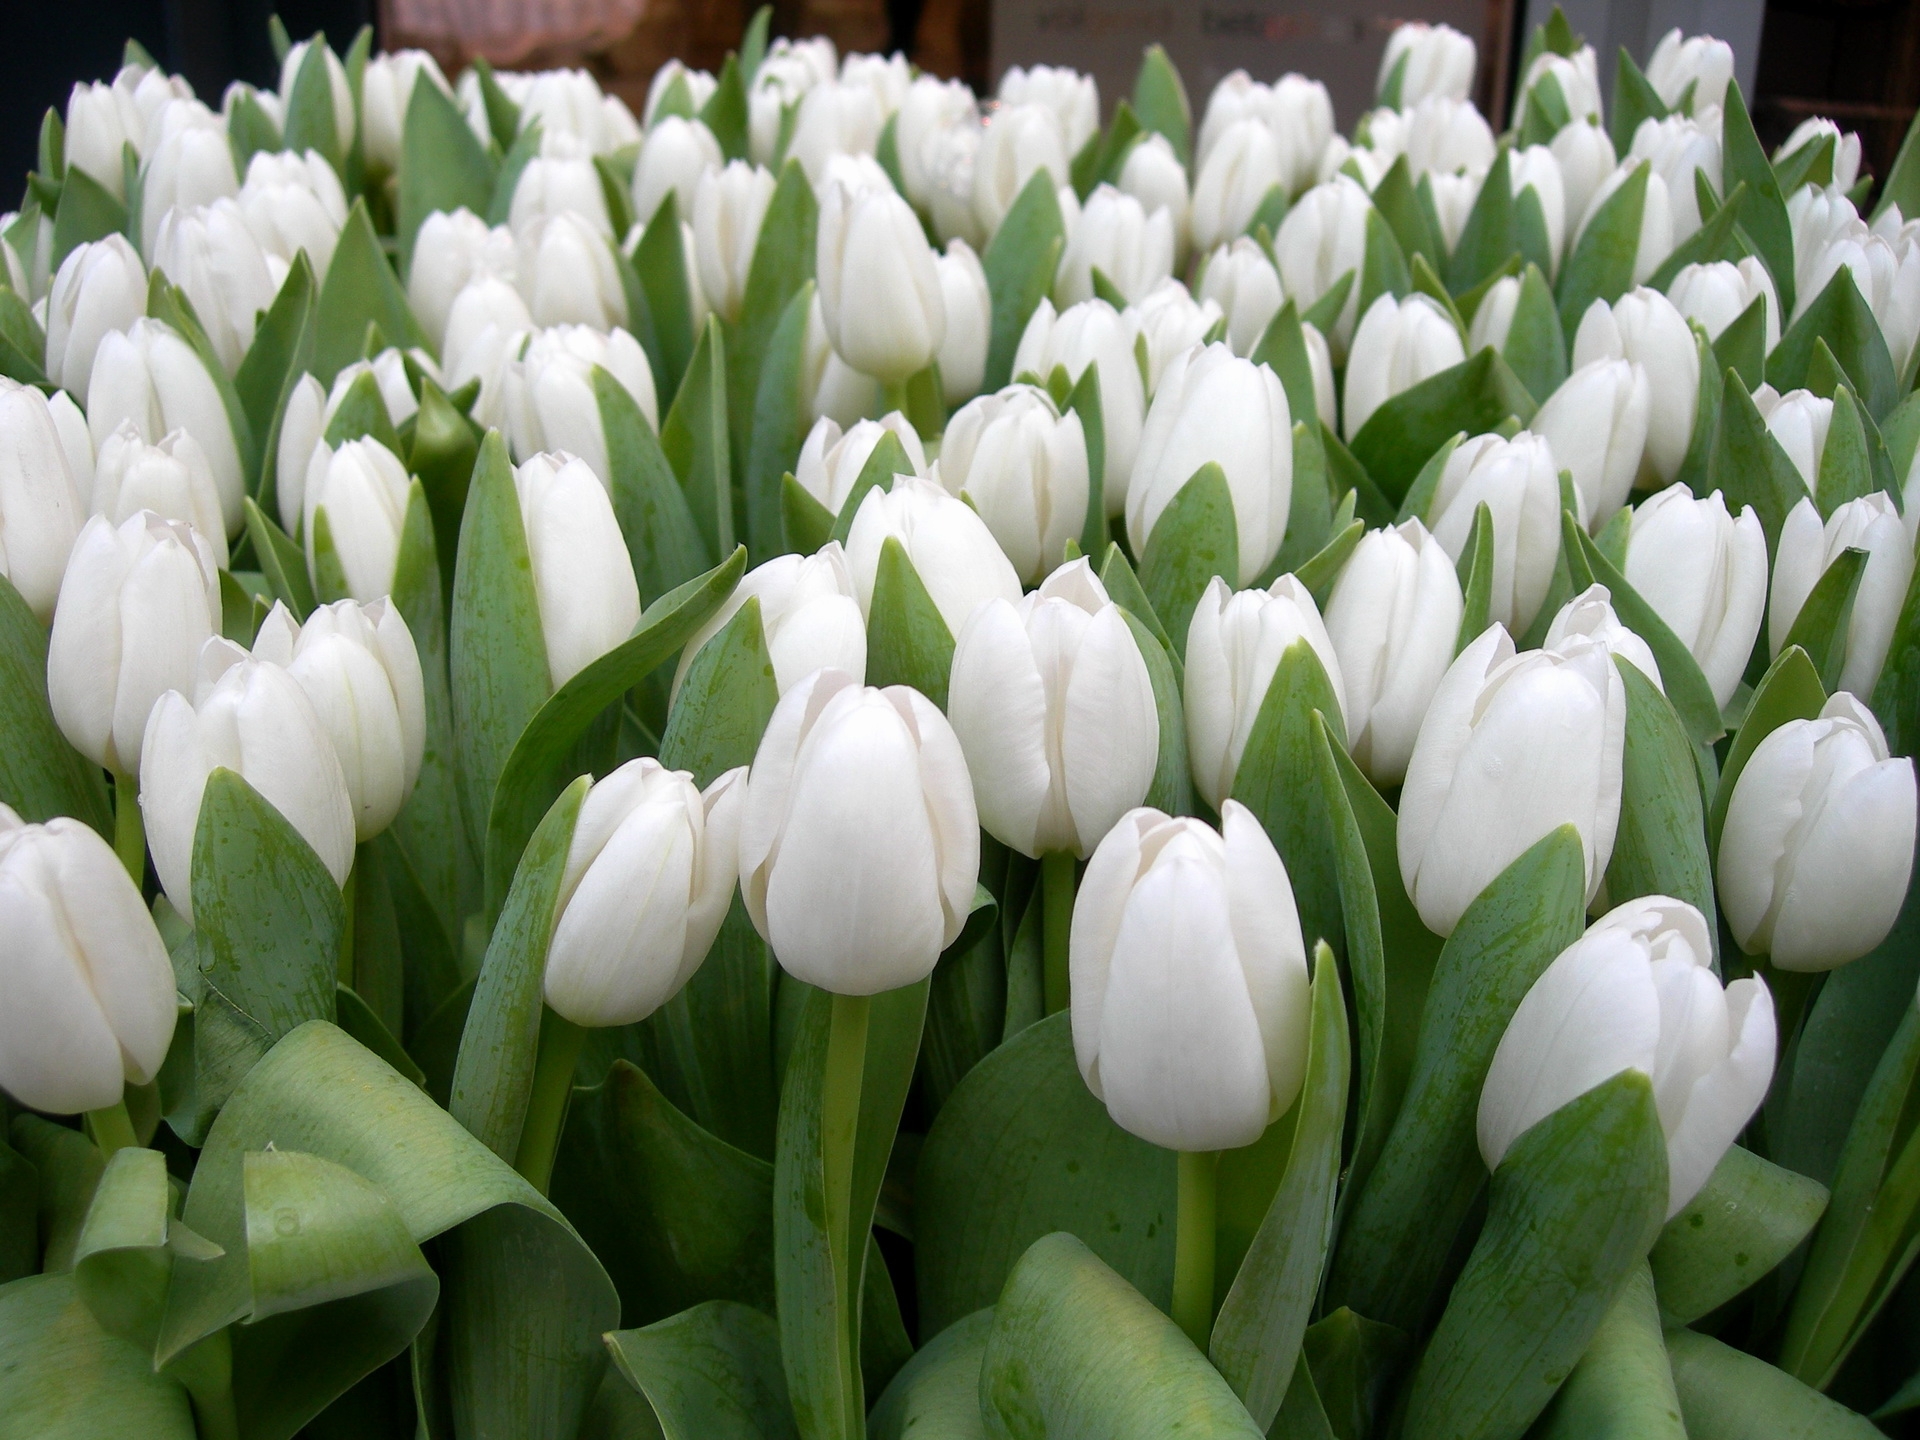 119656 download wallpaper flowers, tulips, white, beauty, greens, spring screensavers and pictures for free